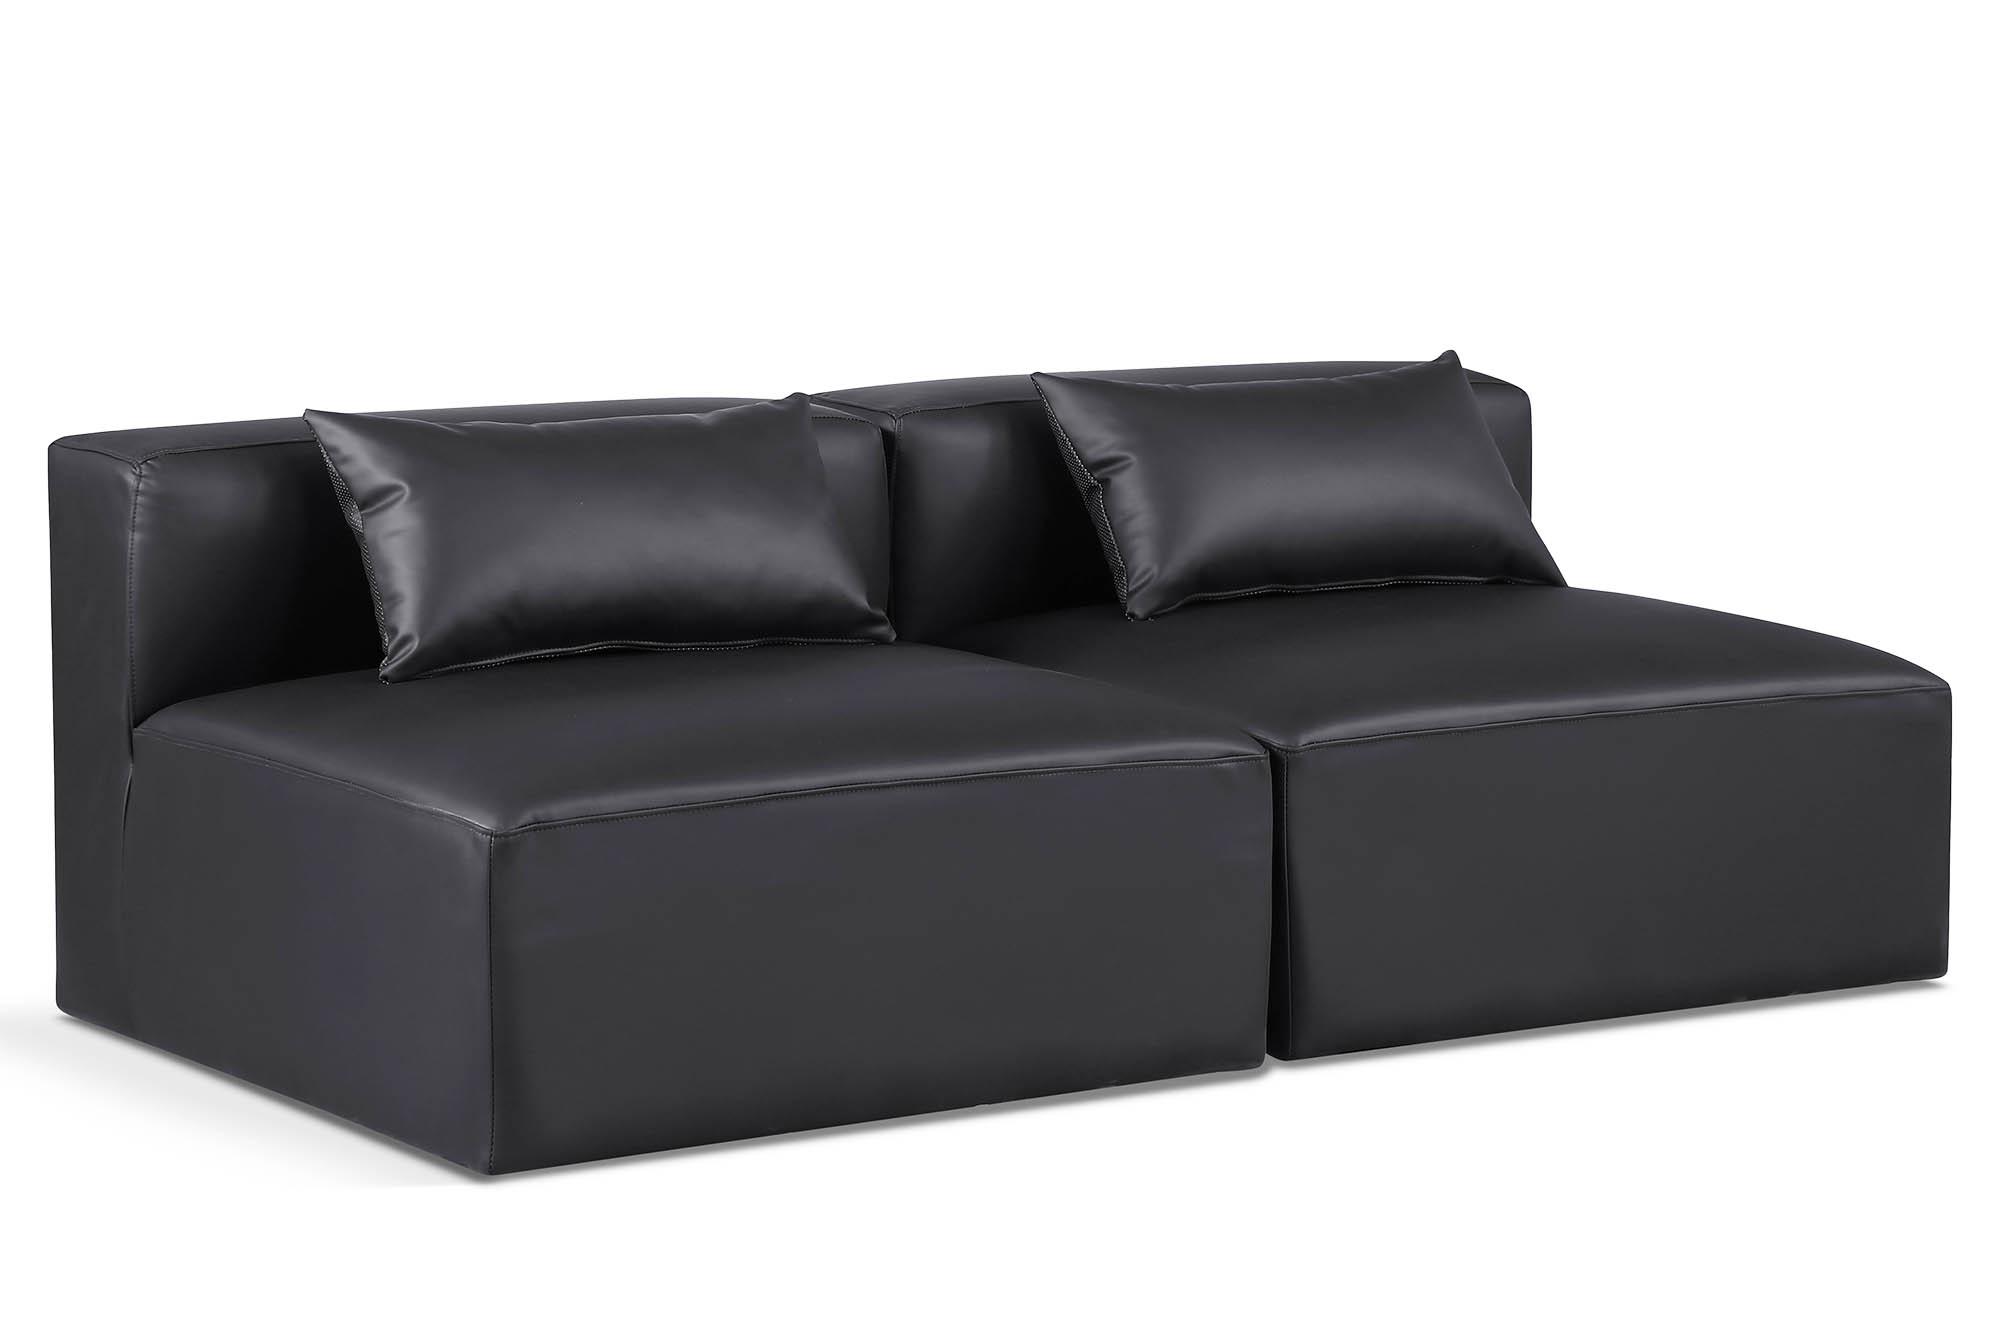 Contemporary, Modern Modular Sofa CUBE 668Black-S72A 668Black-S72A in Black Faux Leather